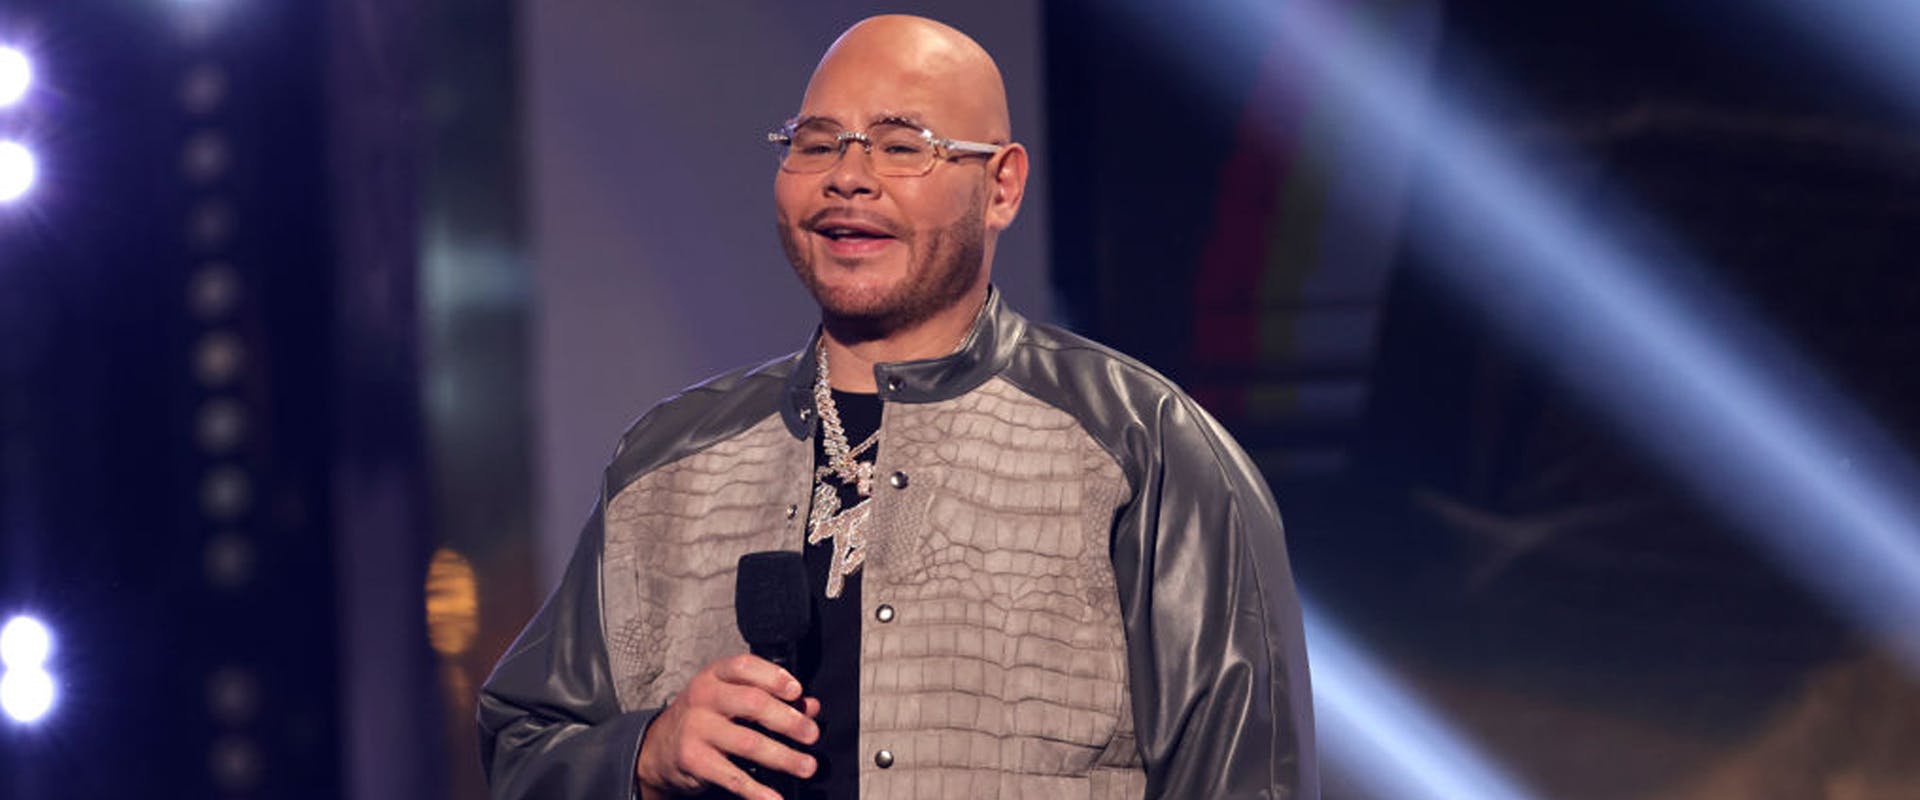 BET Hip Hop Awards 2023 - Show
ATLANTA, GEORGIA - OCTOBER 03: In this image released on October 10, 2023, Fat Joe speaks onstage during the BET Hip Hop Awards 2023 at Cobb Energy Performing Arts Center on October 03, 2023 in Atlanta, Georgia